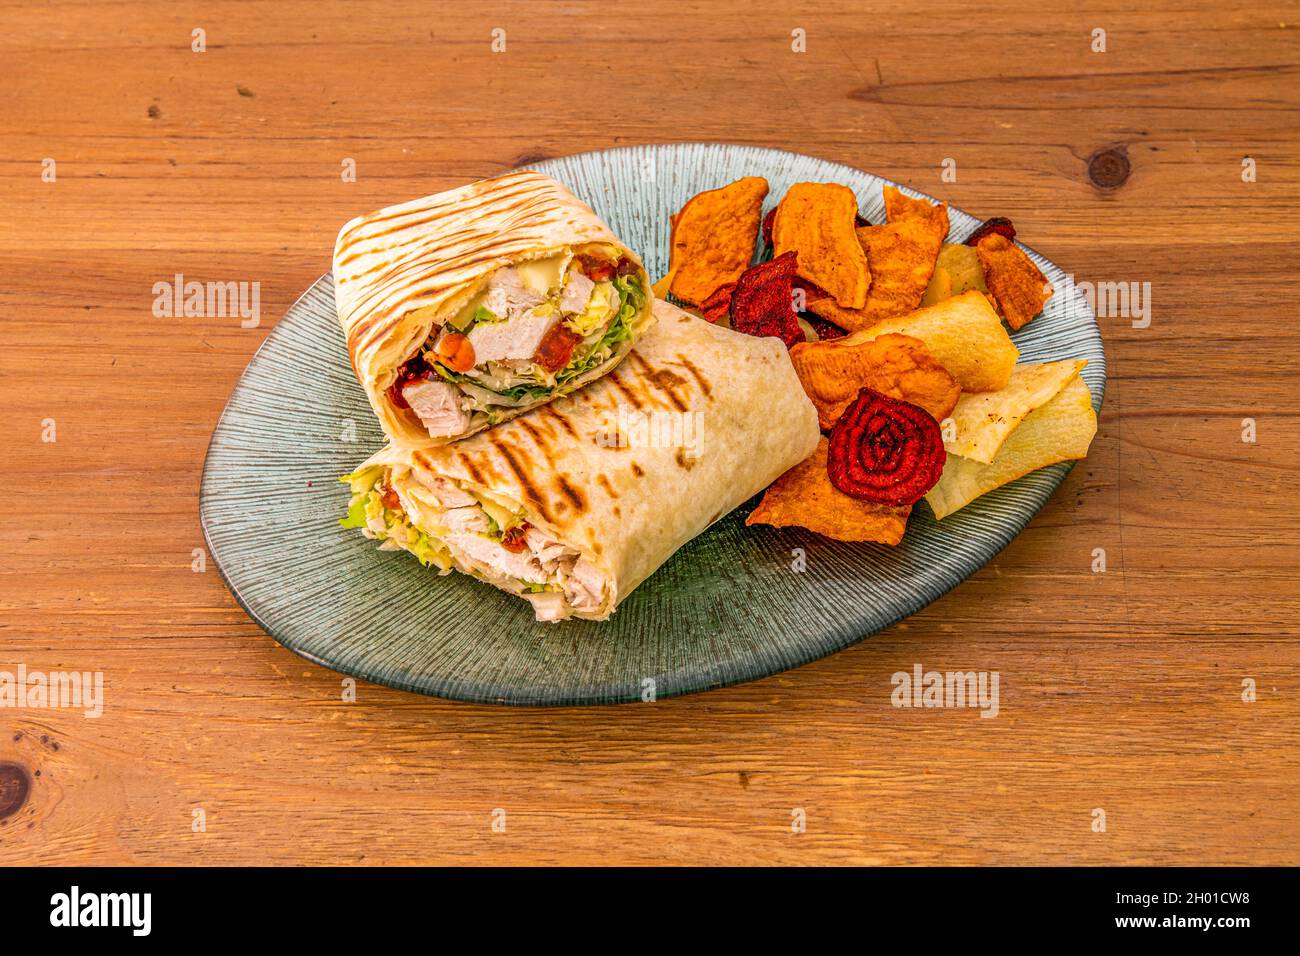 Chicken Vegetable Wrap Wrapped with Grilled Tortilla with Fried Vegetable Chips Stock Photo